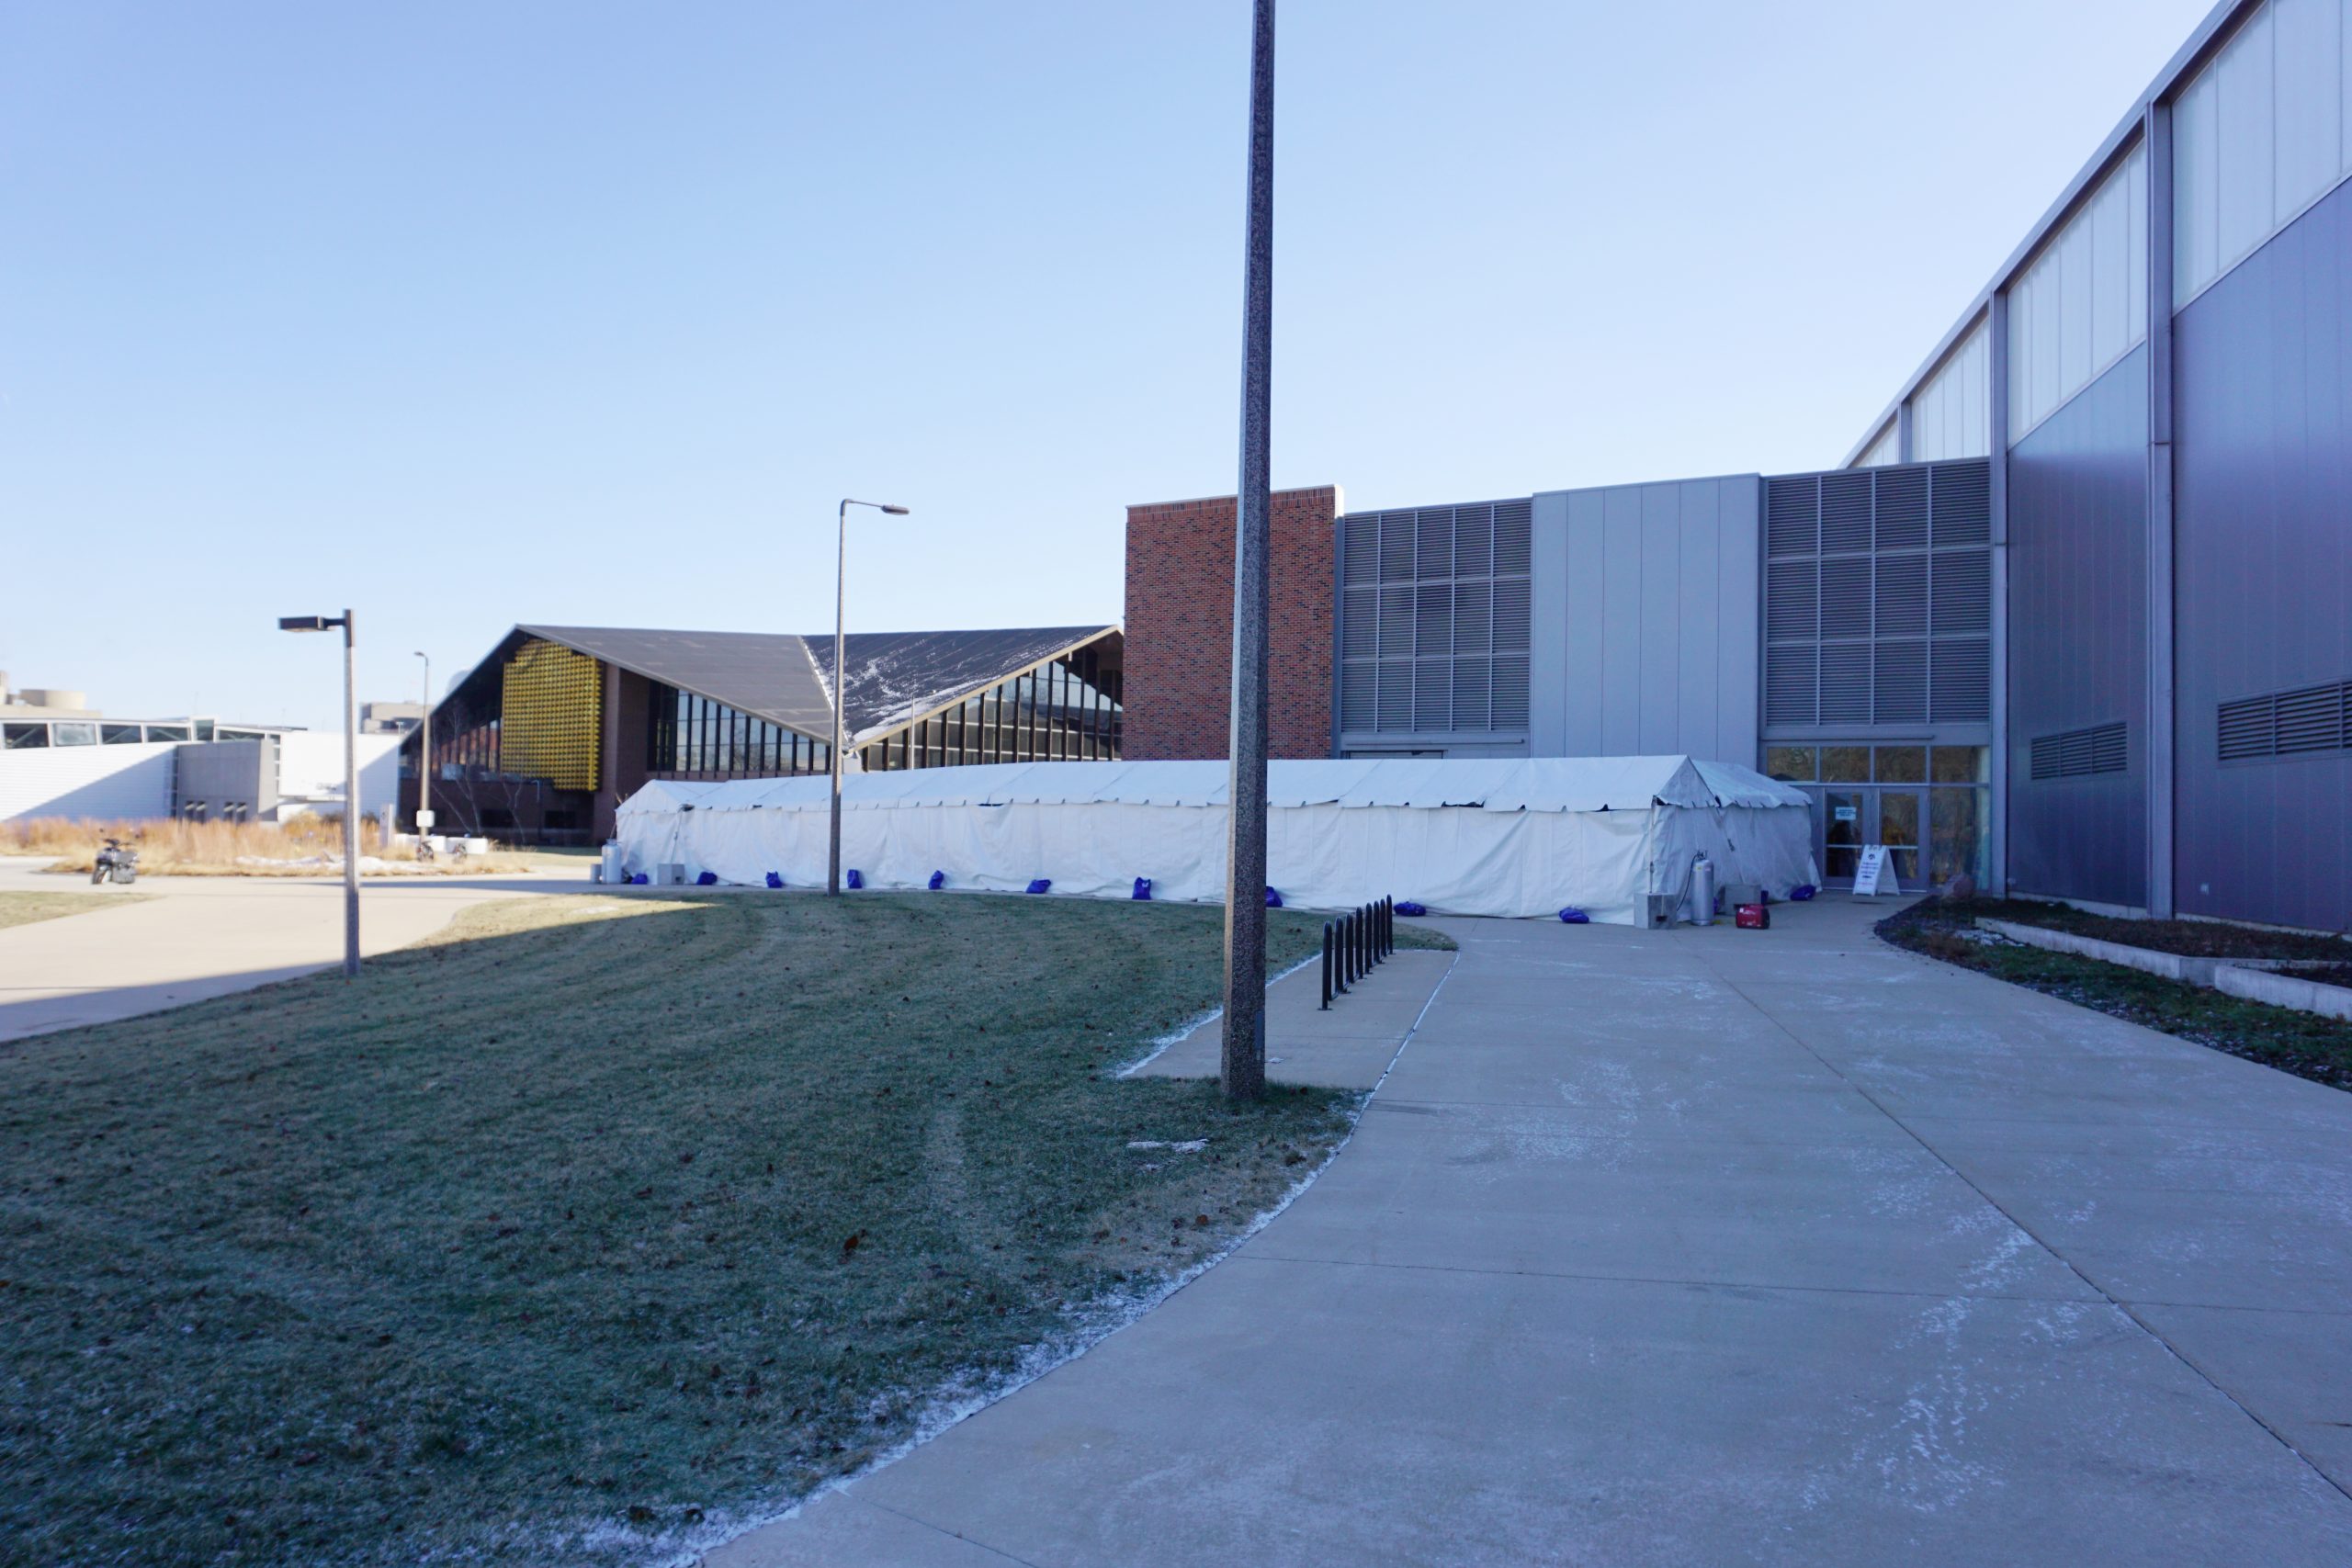 North-West end of the 10' x 340' heated frame tent from the Indoor Practice Facility to Recreation Bldg at The University of Iowa Athletic Department